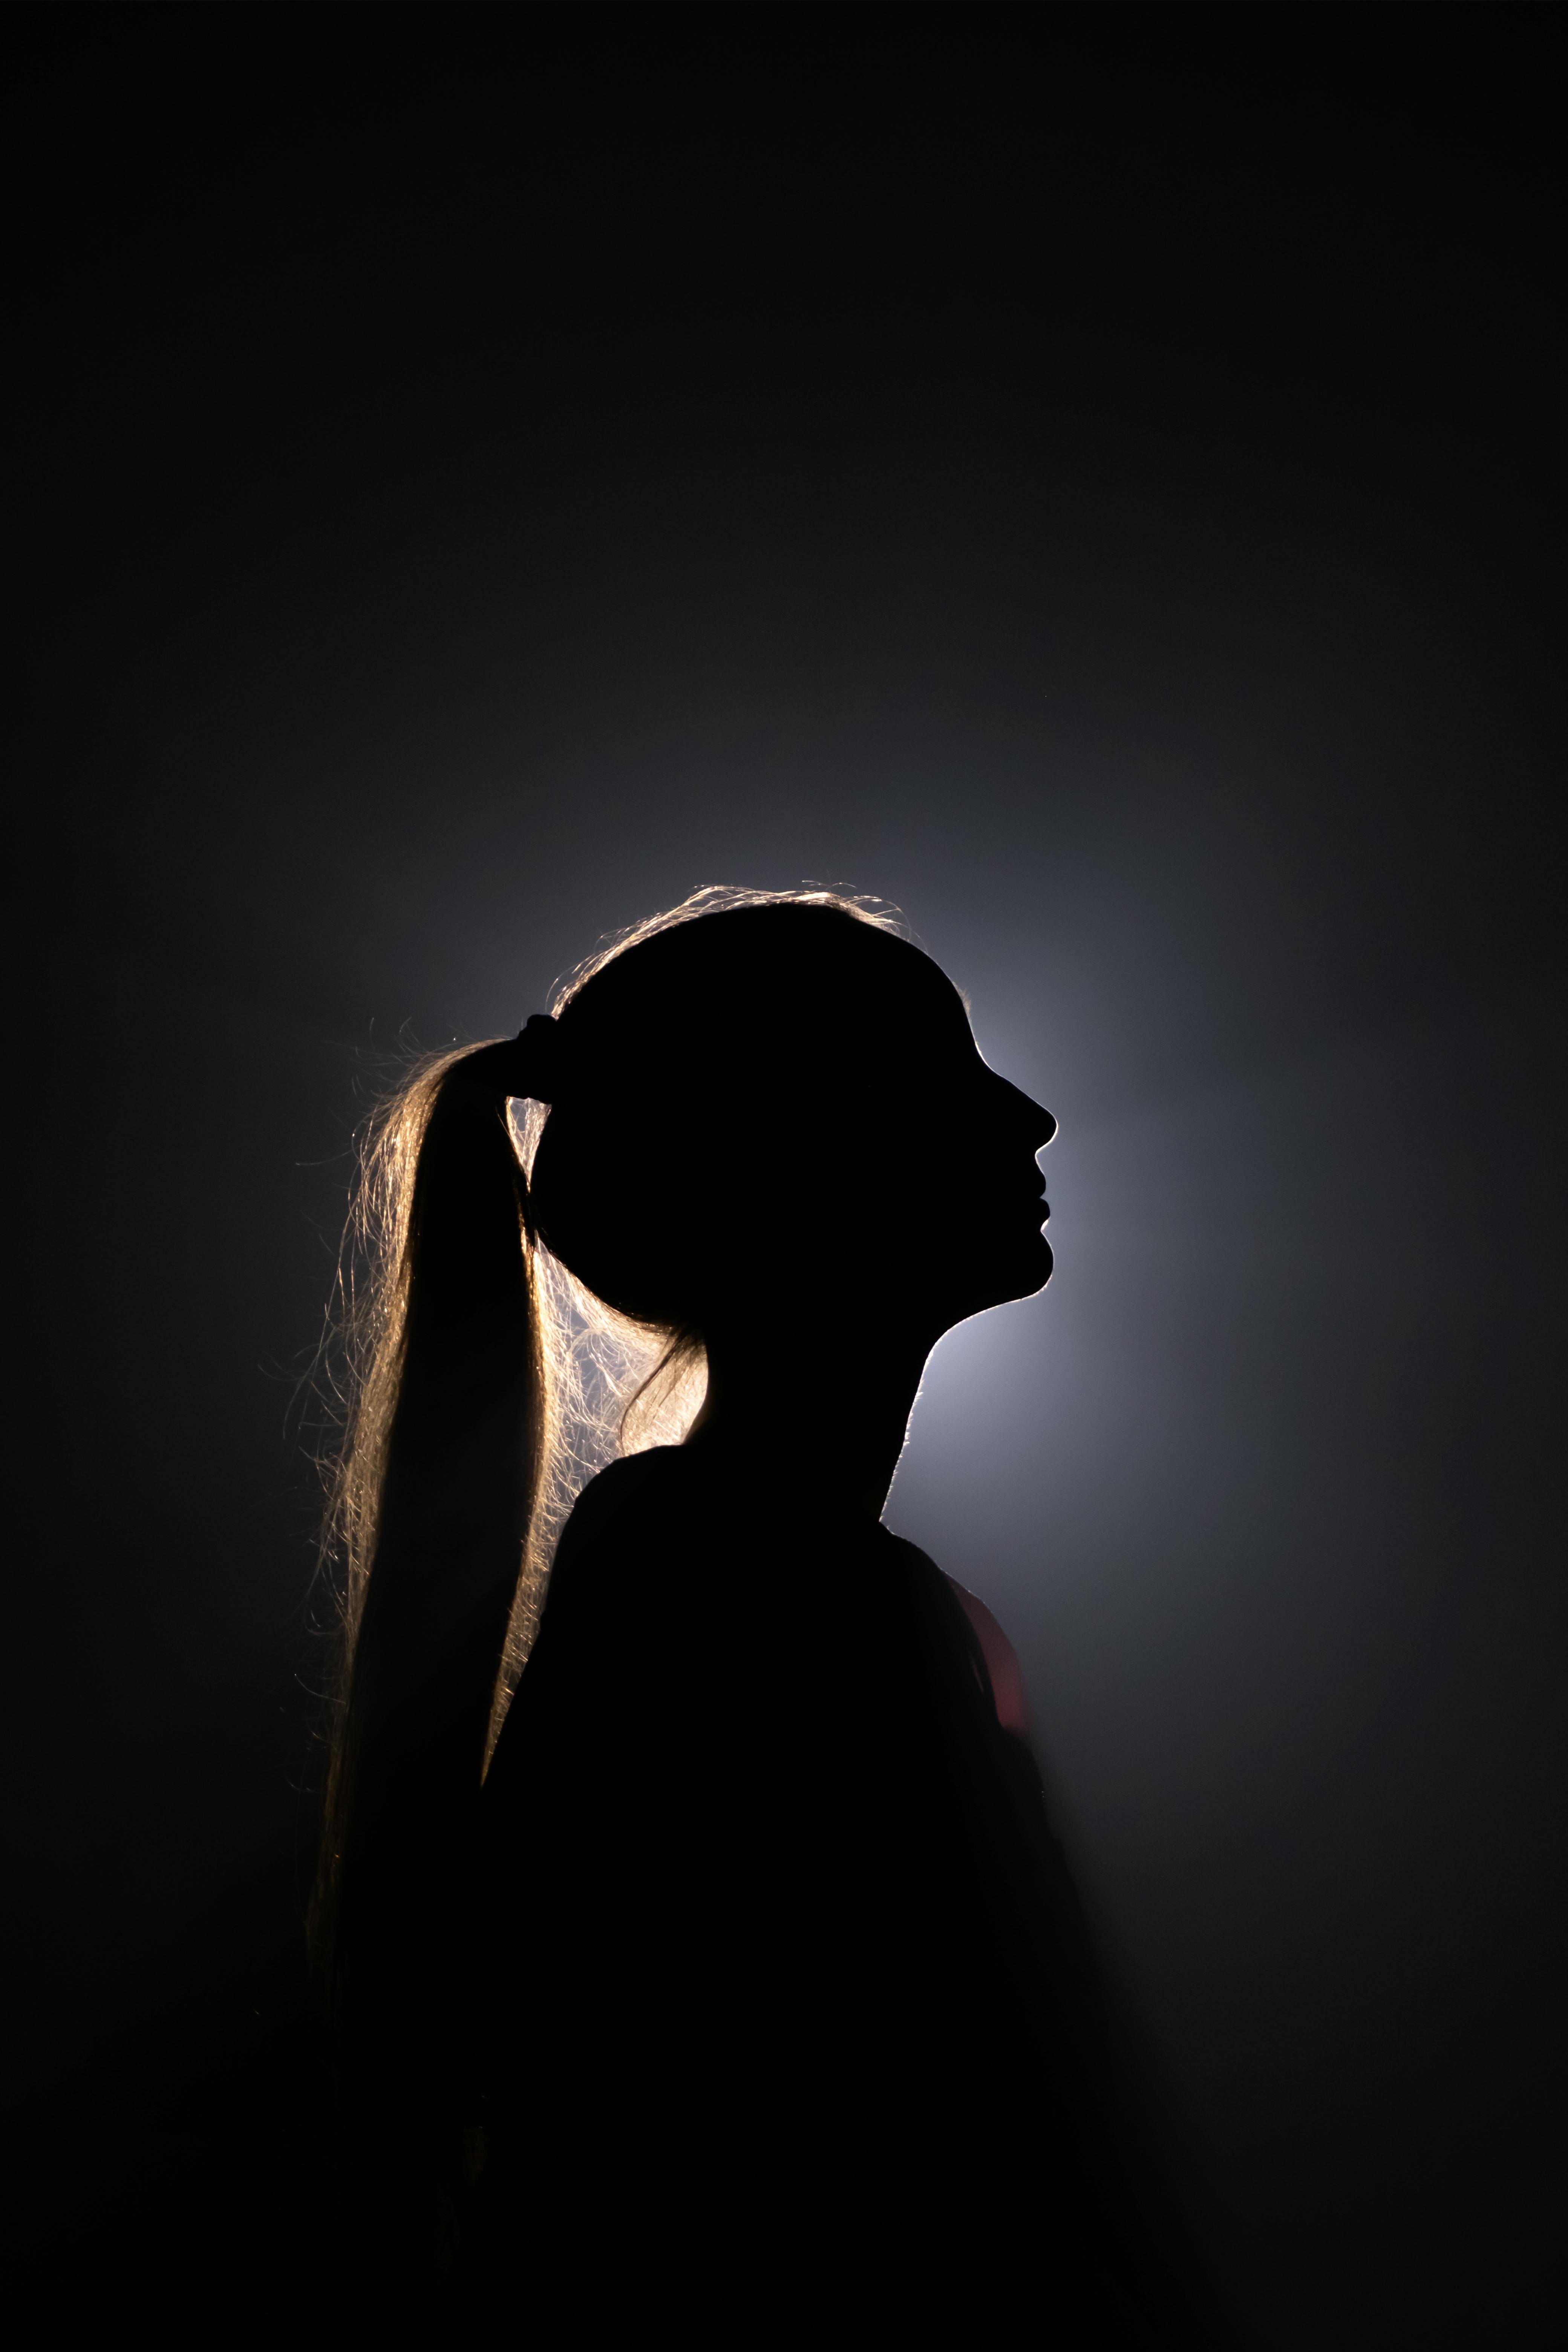 Women Silhouette Photos, Download The BEST Free Women Silhouette Stock ...